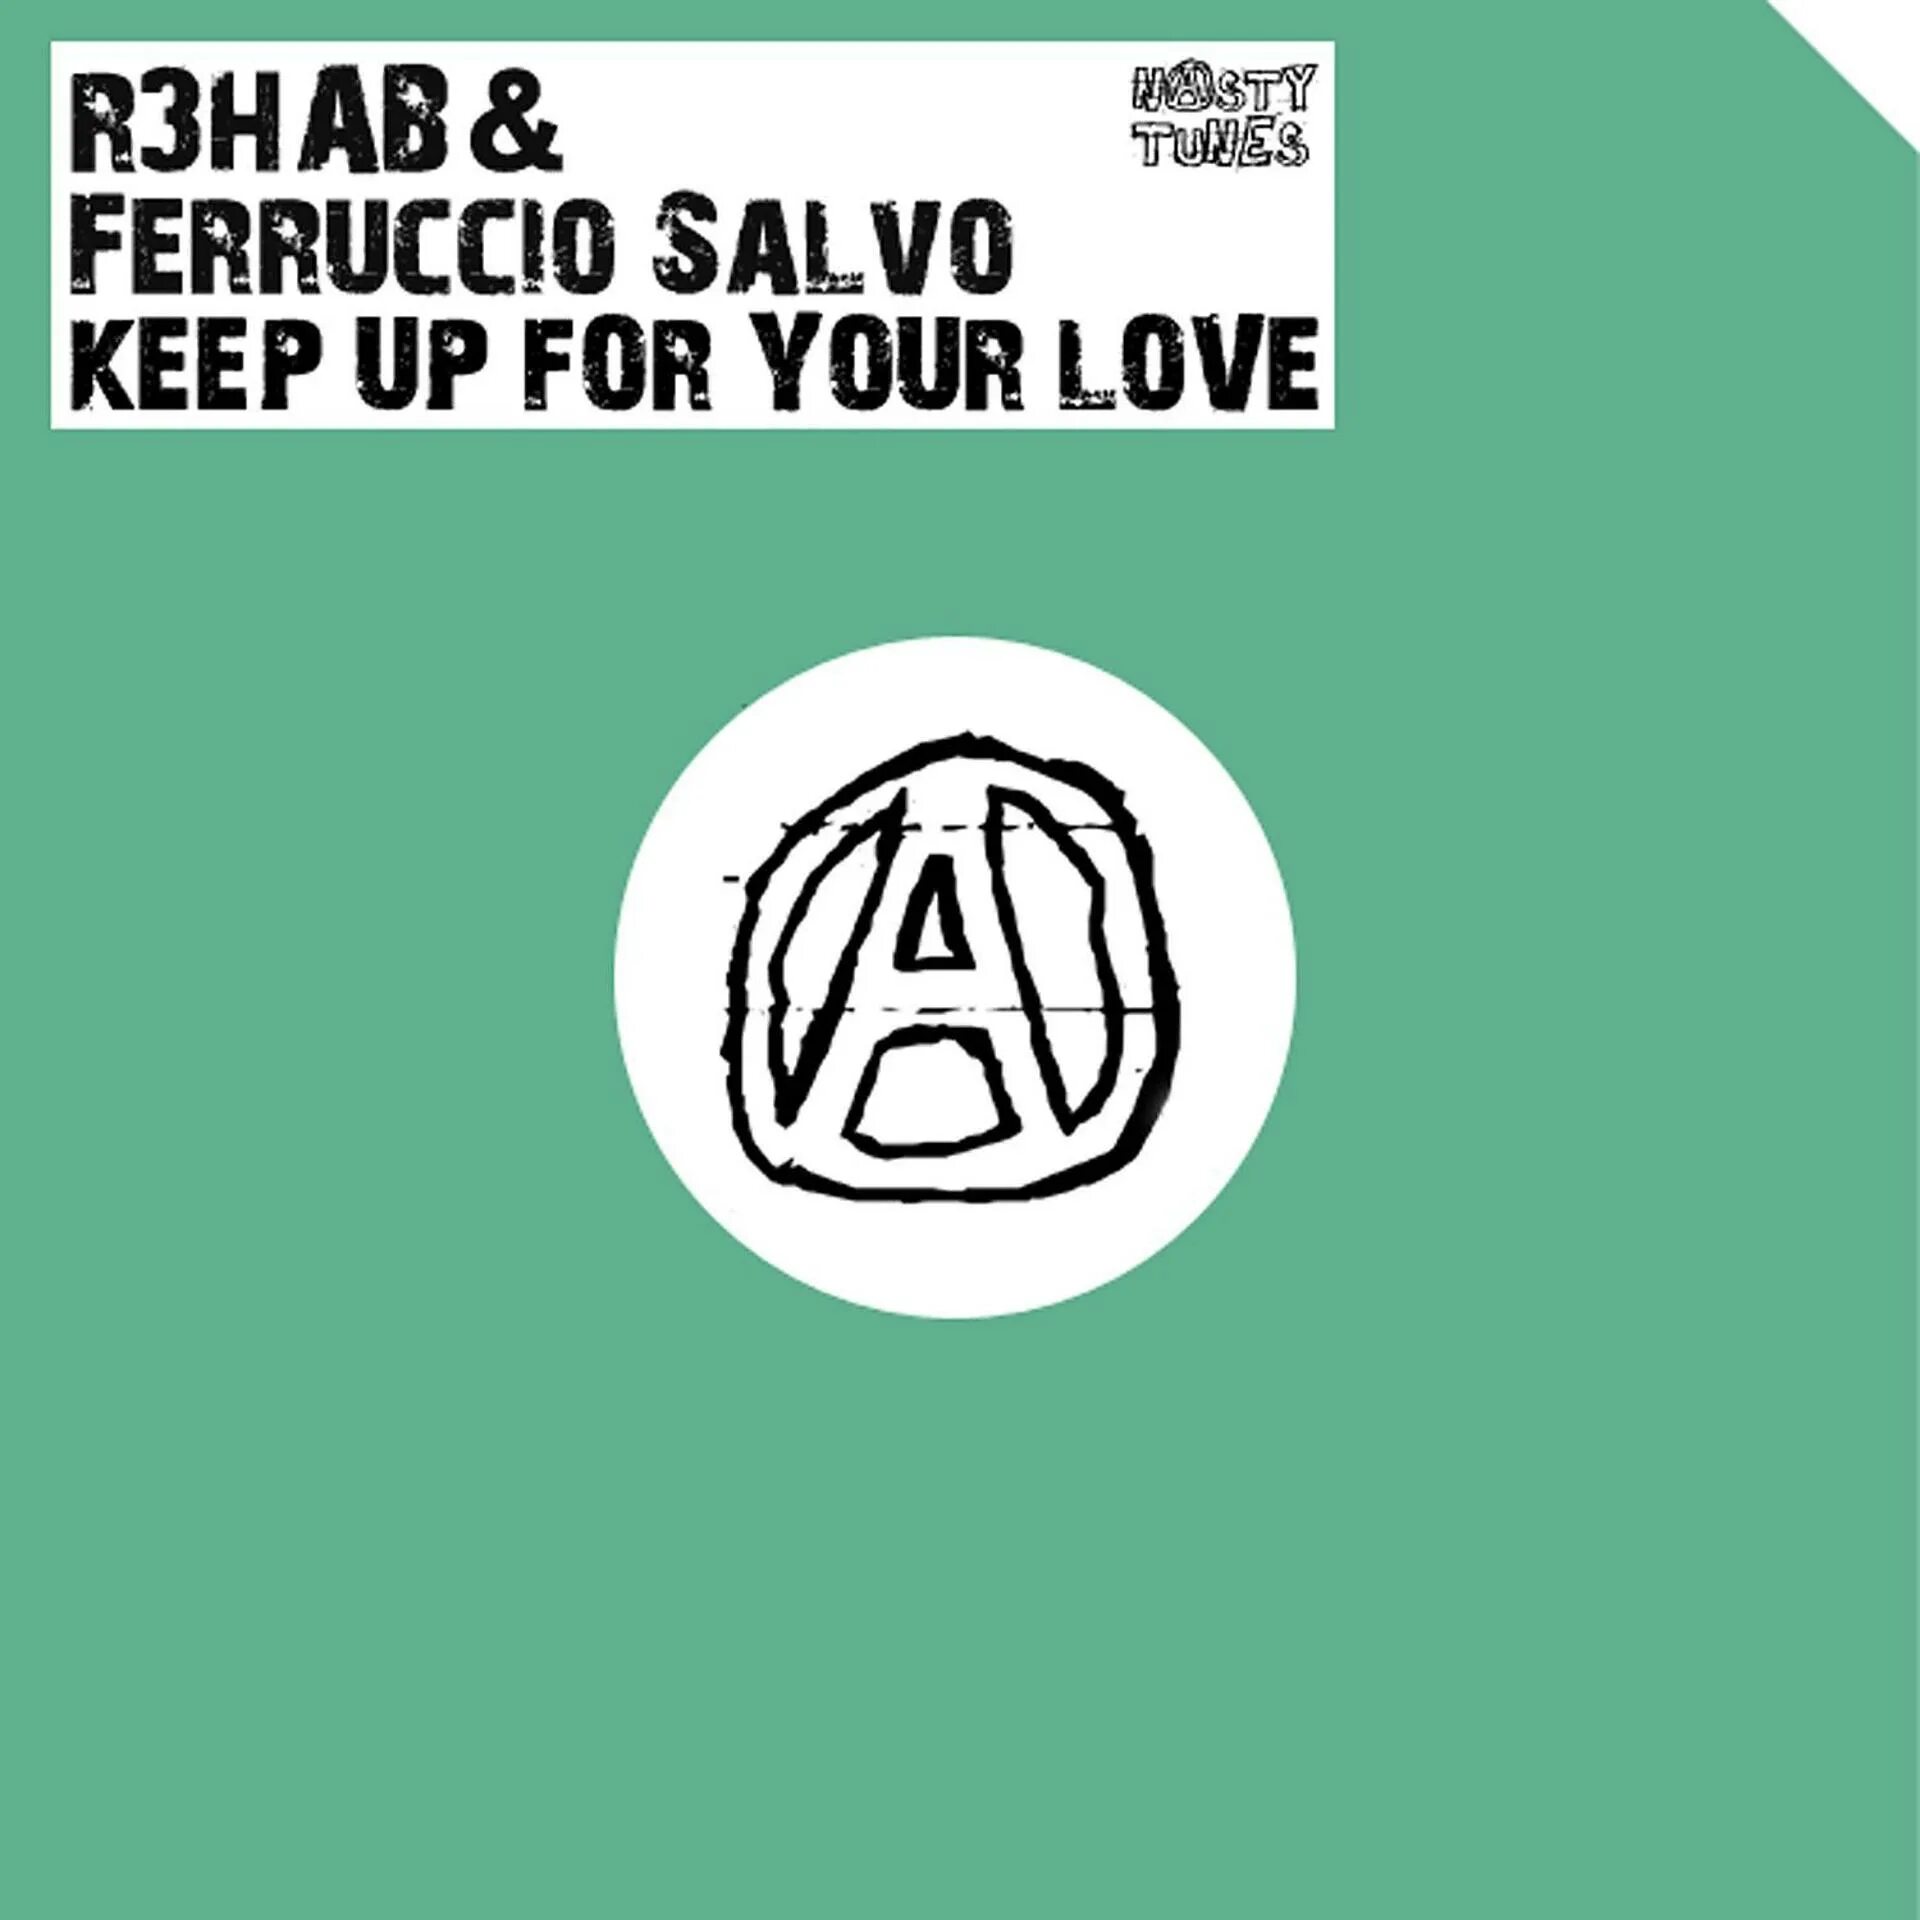 Keep up for your Love Remixes r3hab, Ferruccio Salvo. Love hab. Обложка альбома r3hab & Ciara - get up (Original Mix). STENIX keep it up. Keep your love